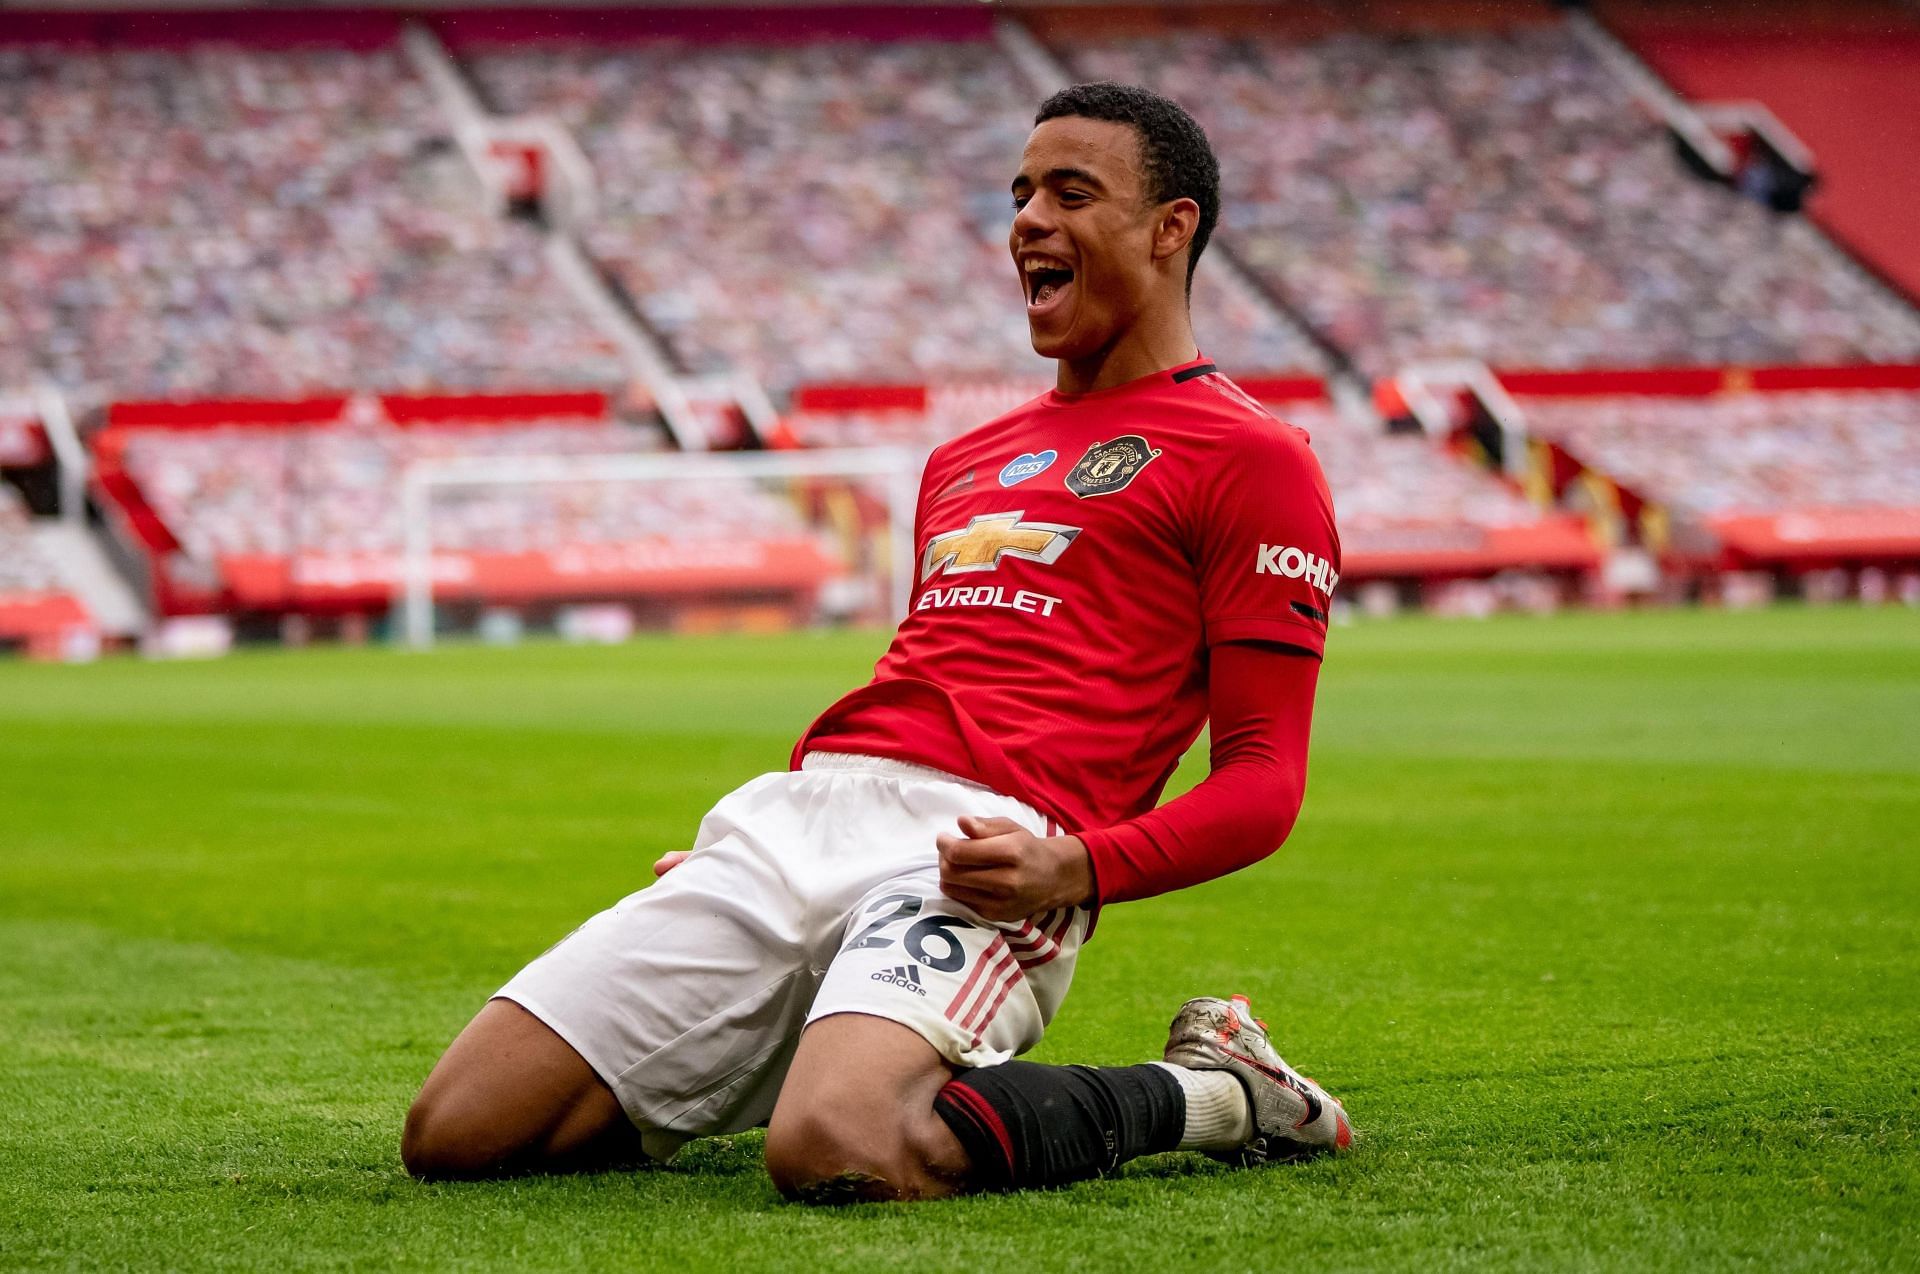 Mason Greenwood has a wand of a left foot, and he displayed that with a stunner against Young Boys.